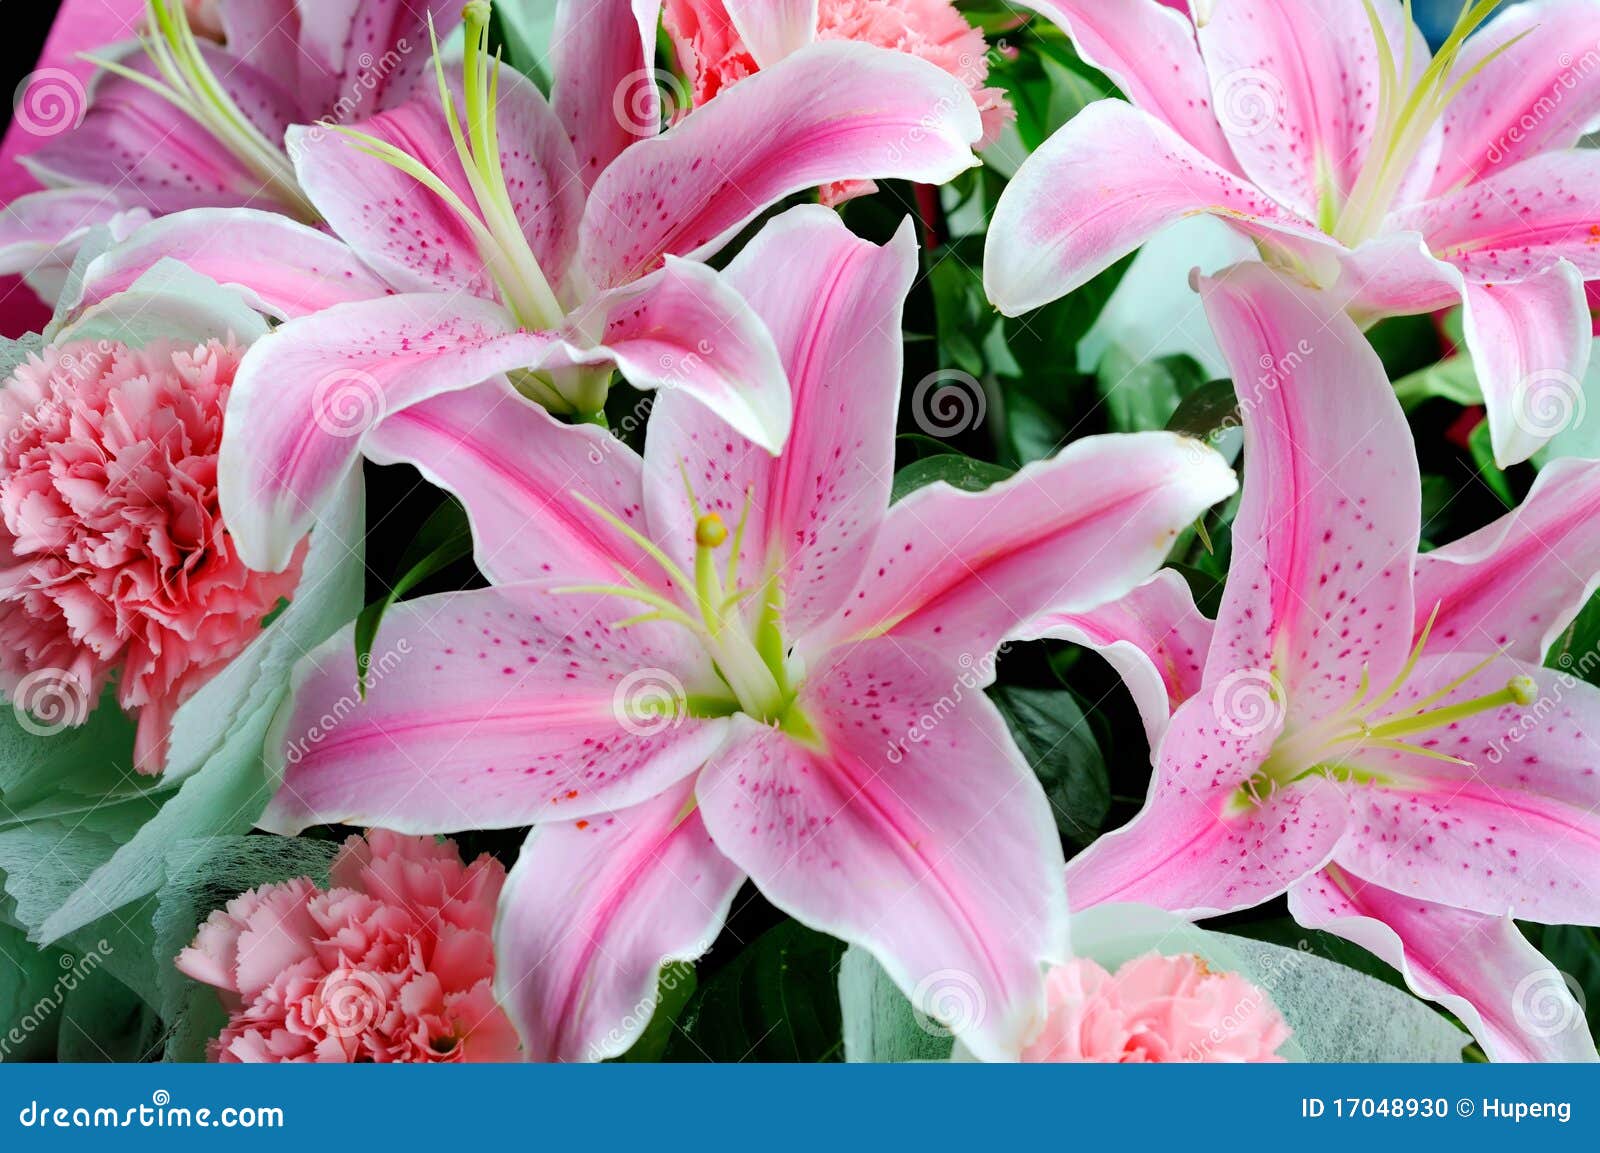 pink lily backgrounds